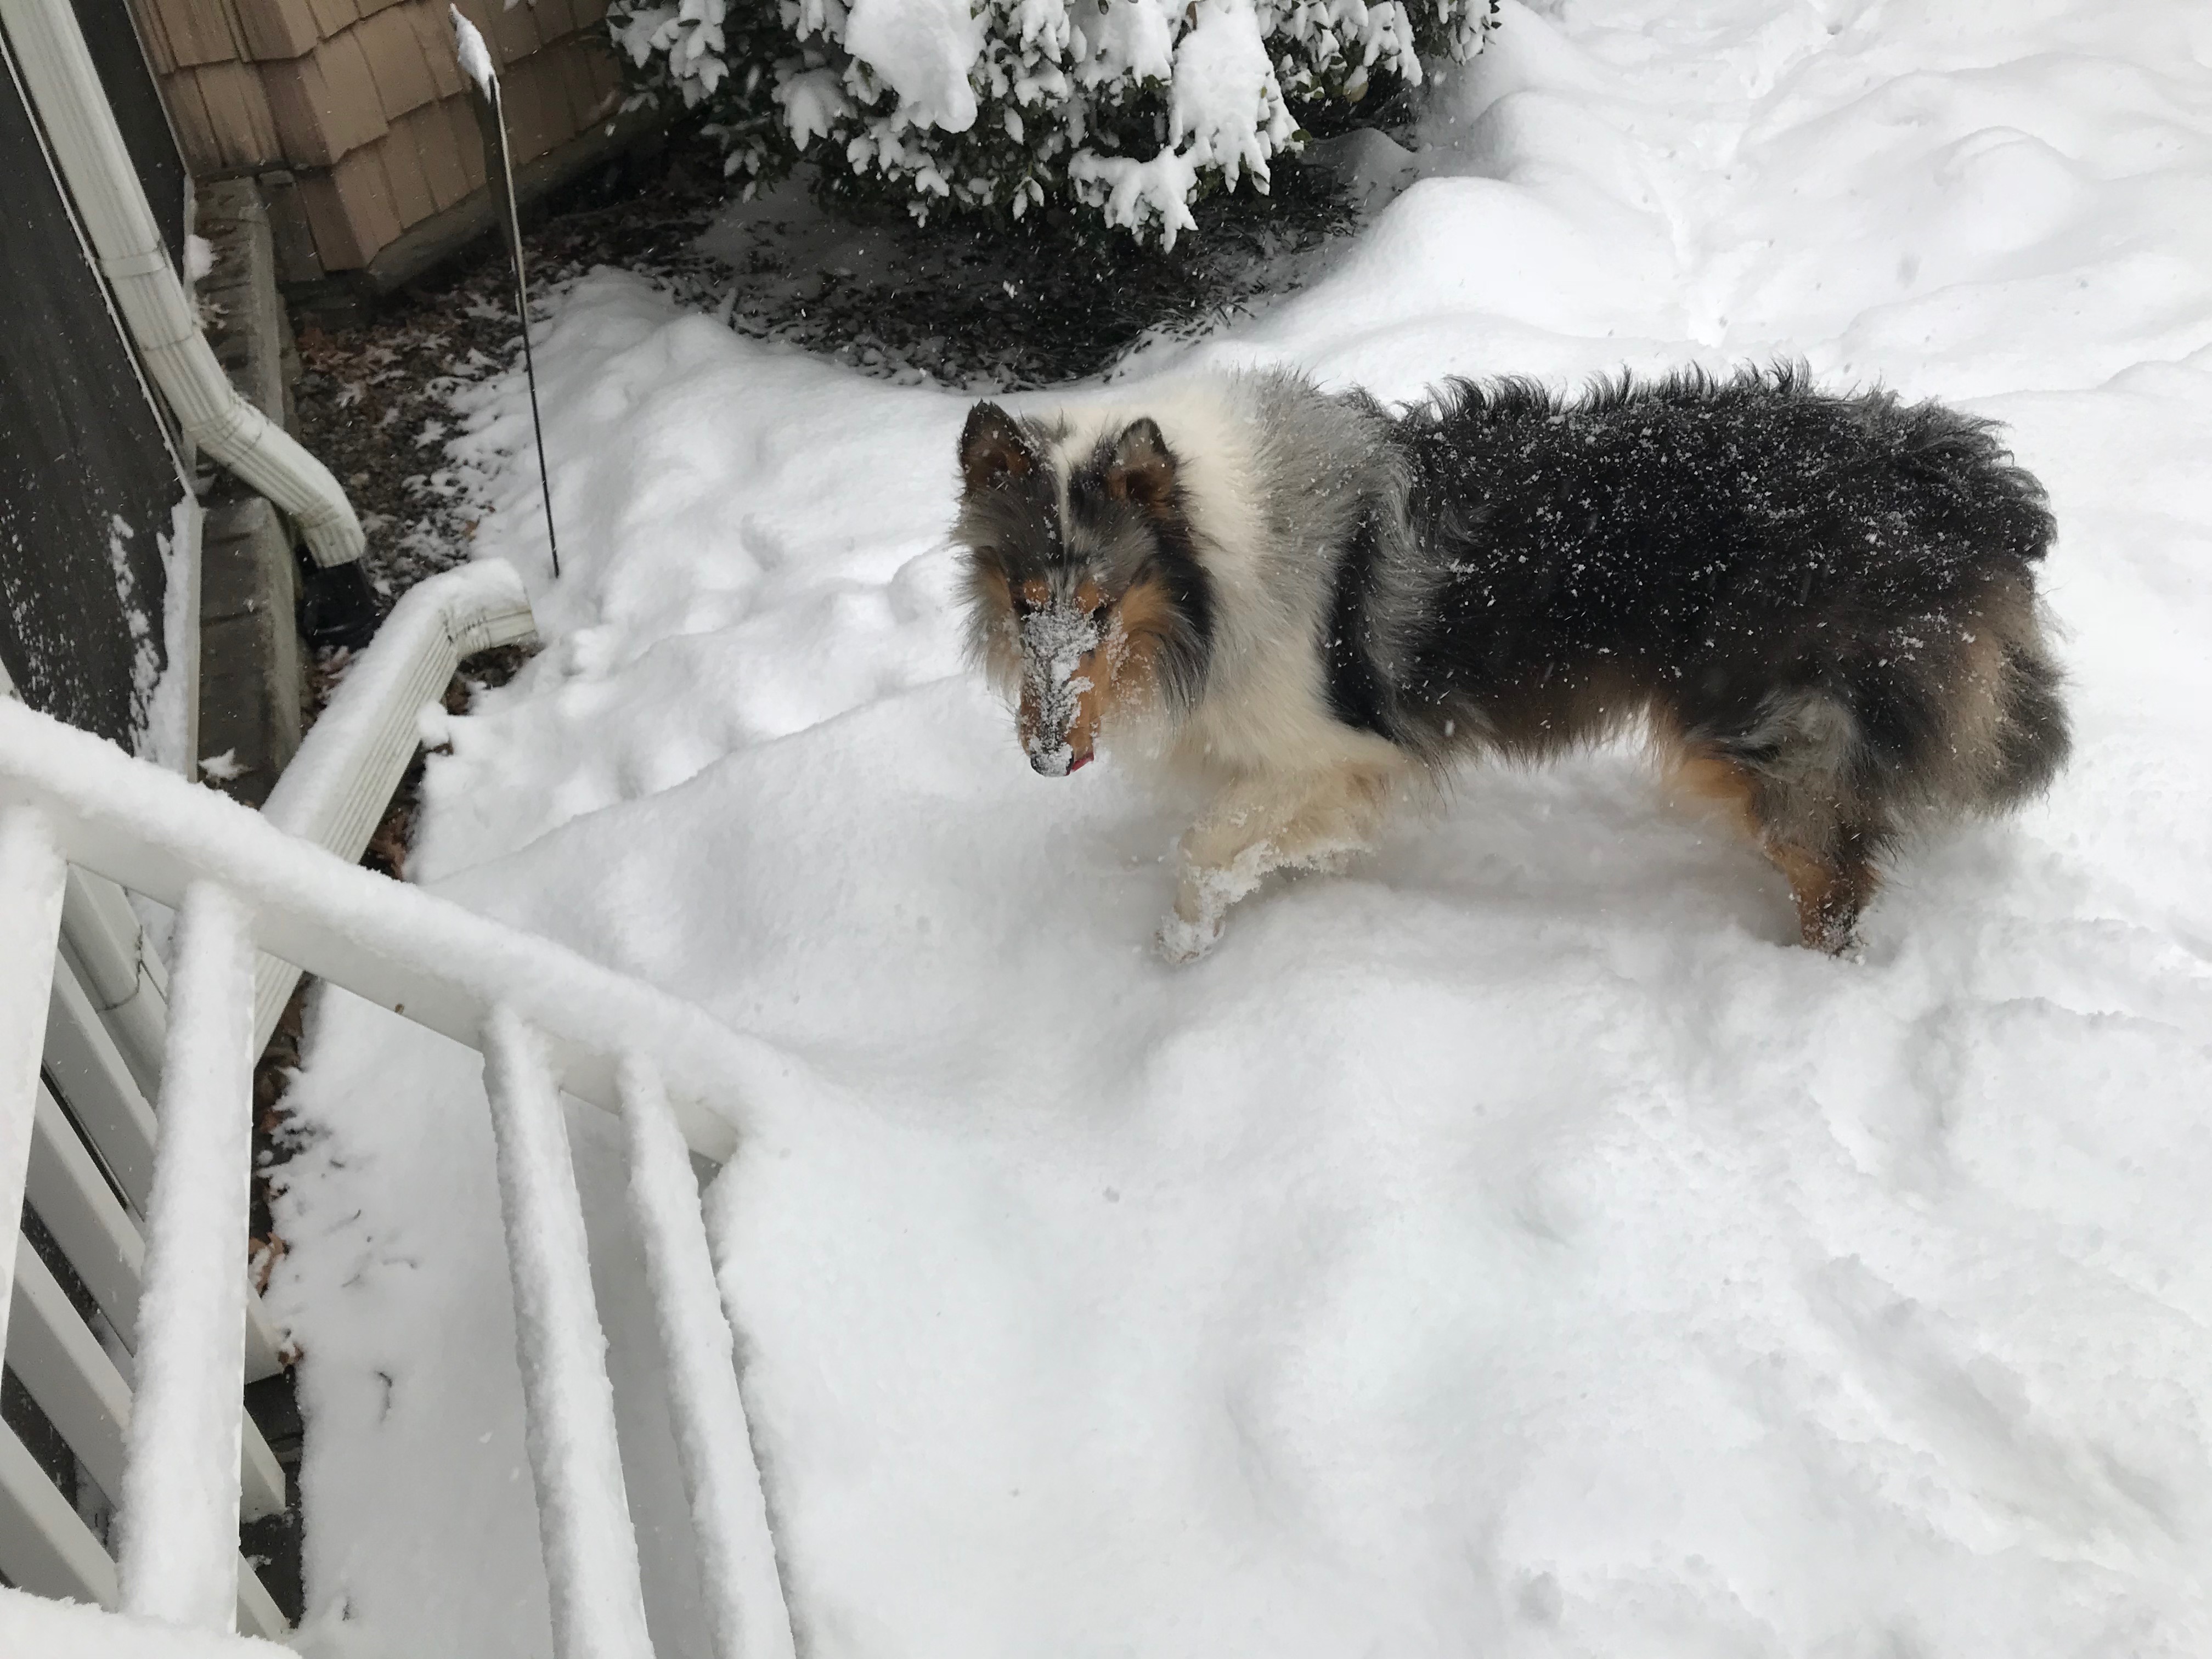 Diasy Playing in the Snow